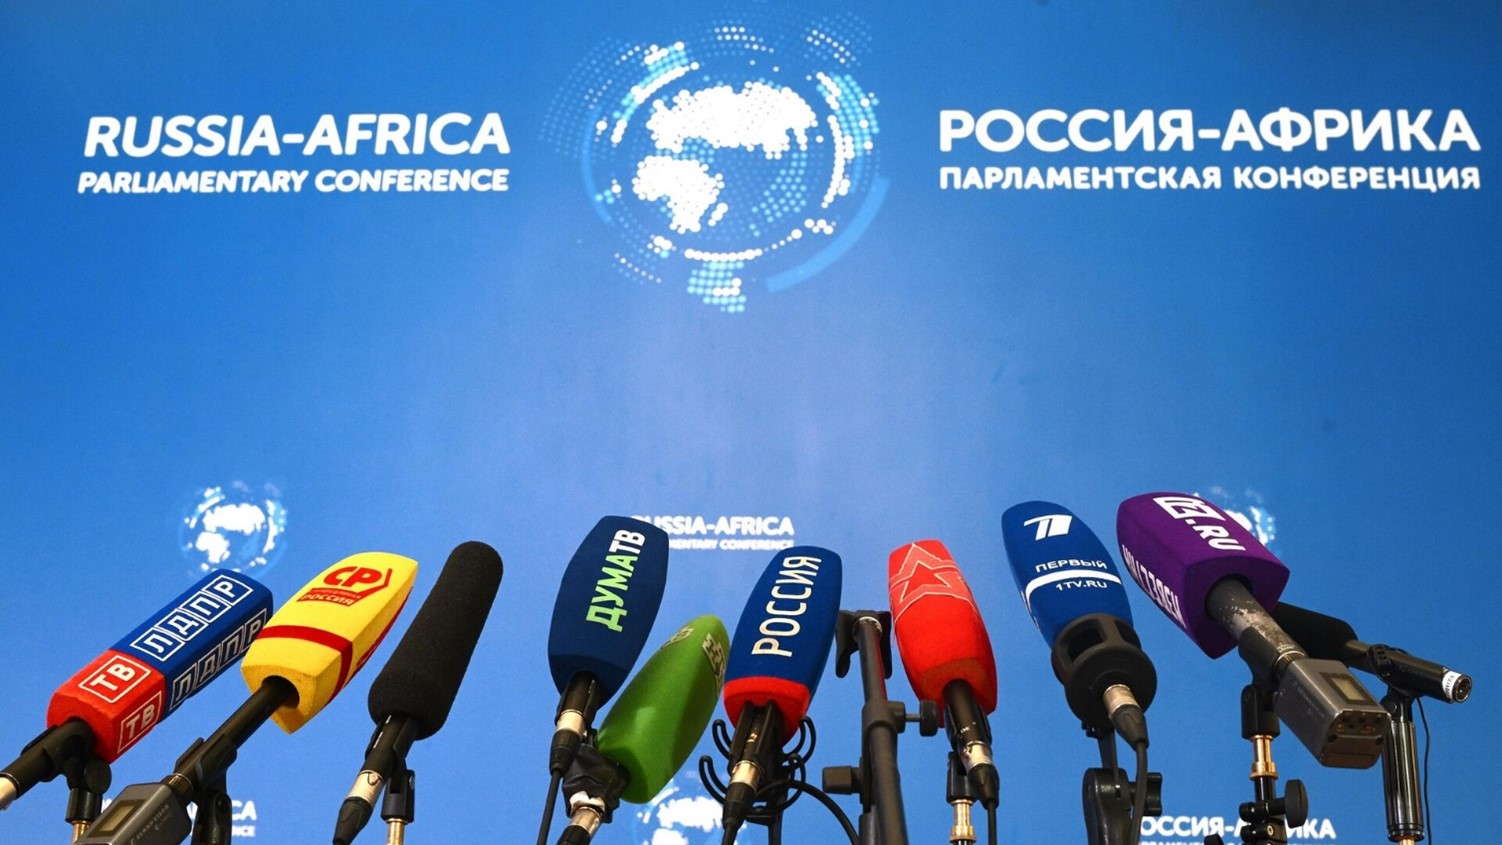 Africa confirms its independence at the parliamentary conference « Russia-Africa »